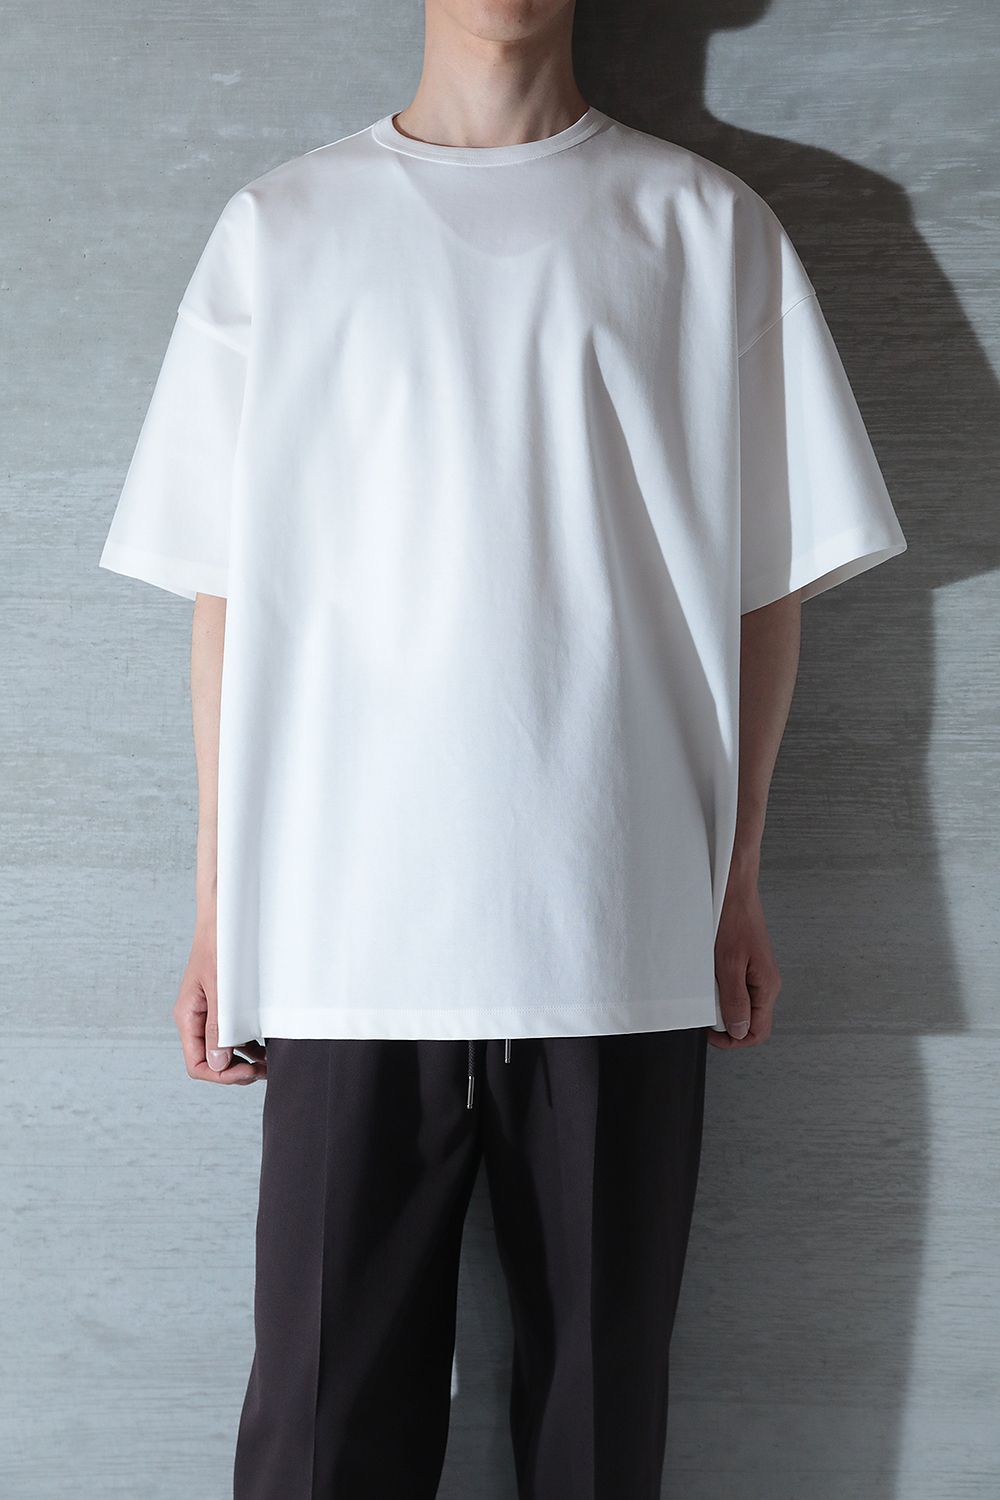 THE RERACS - 【ラスト1点】THE SUPER OVER SIZE T-SHIRT(WHITE